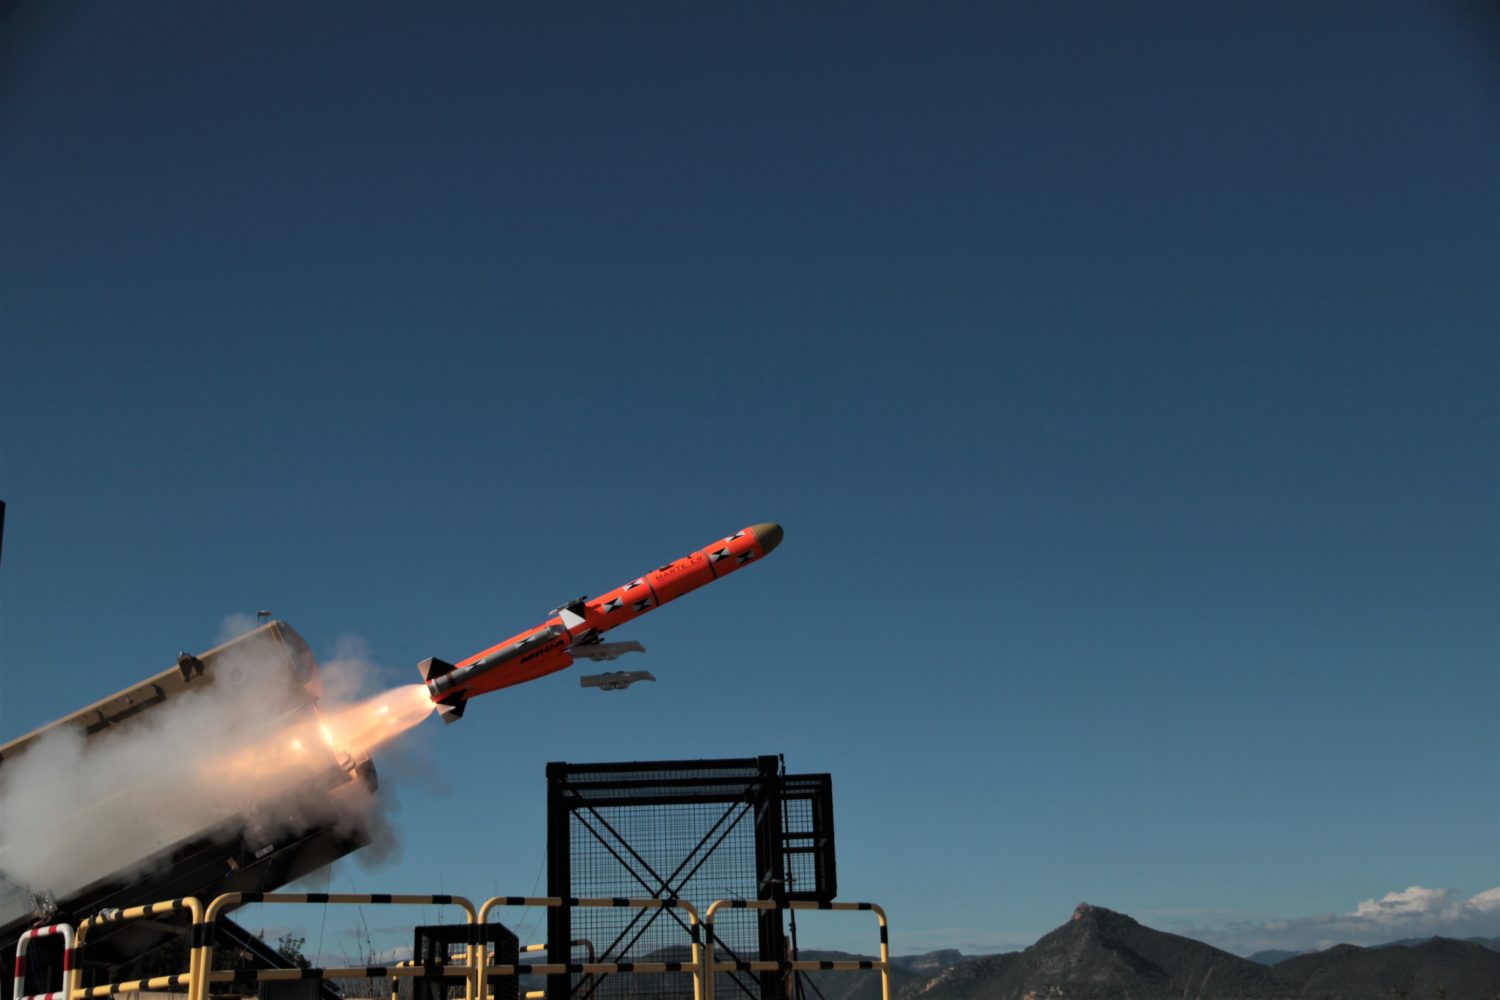 MBDA's Marte ER anti-ship missile has completed its second firing carried out at the PISQ (Poligono Interforze del Salto di Quirra) test range in Sardinia